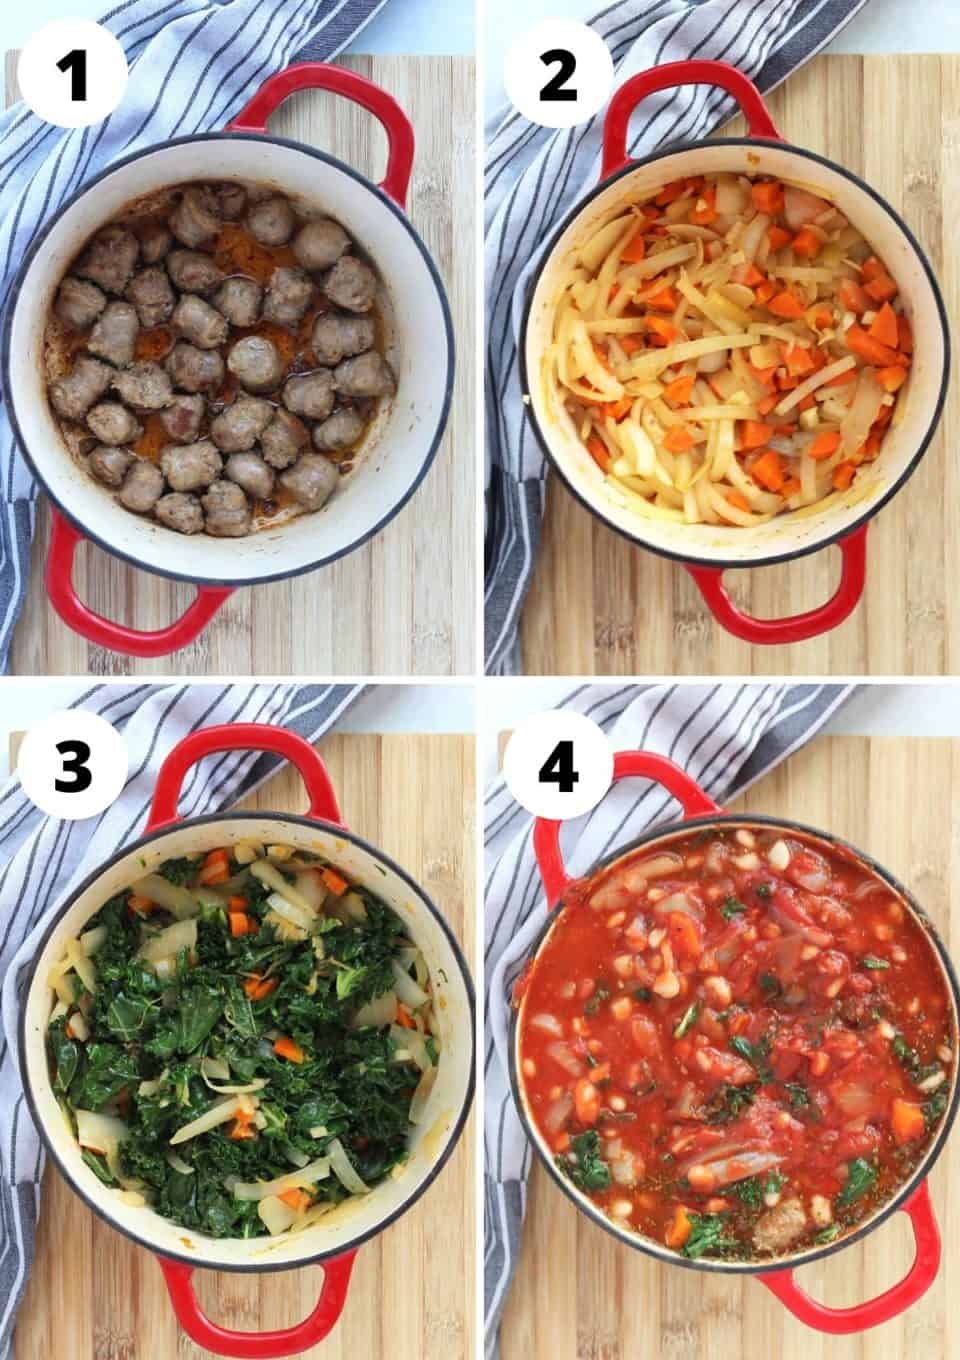 Four step by step photos to show how to make the soup.